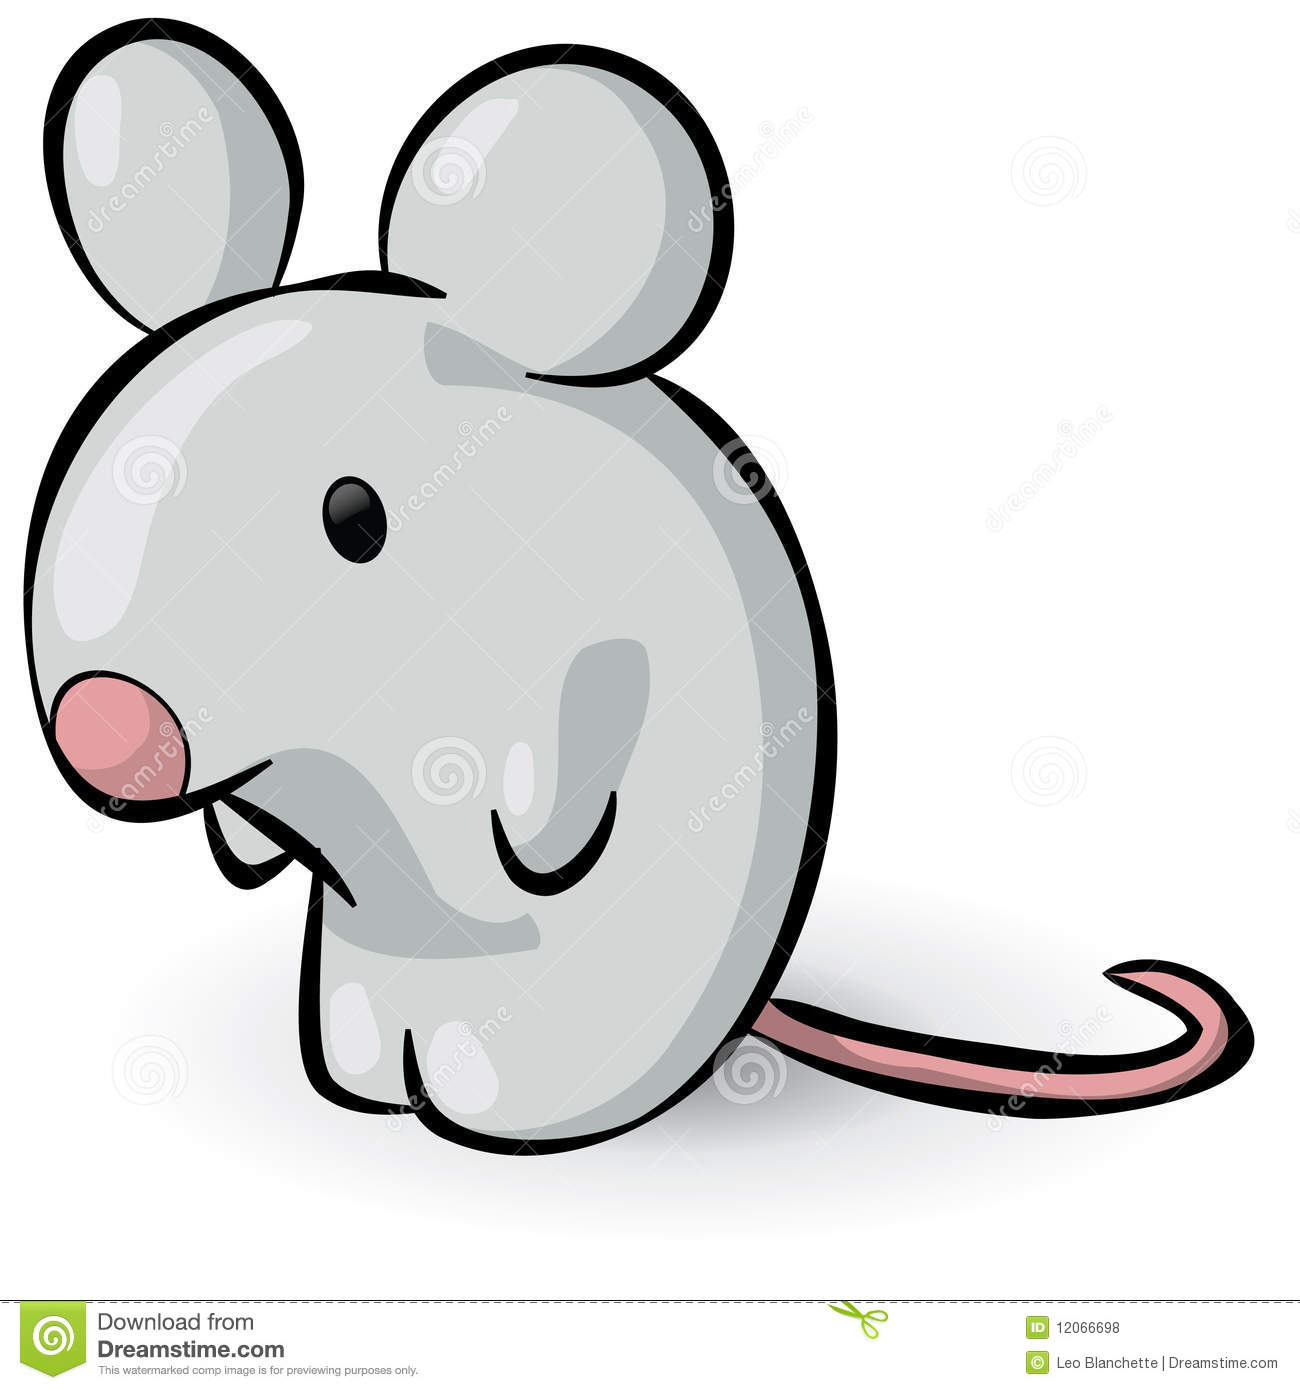 Pictures Of Cartoon Mice